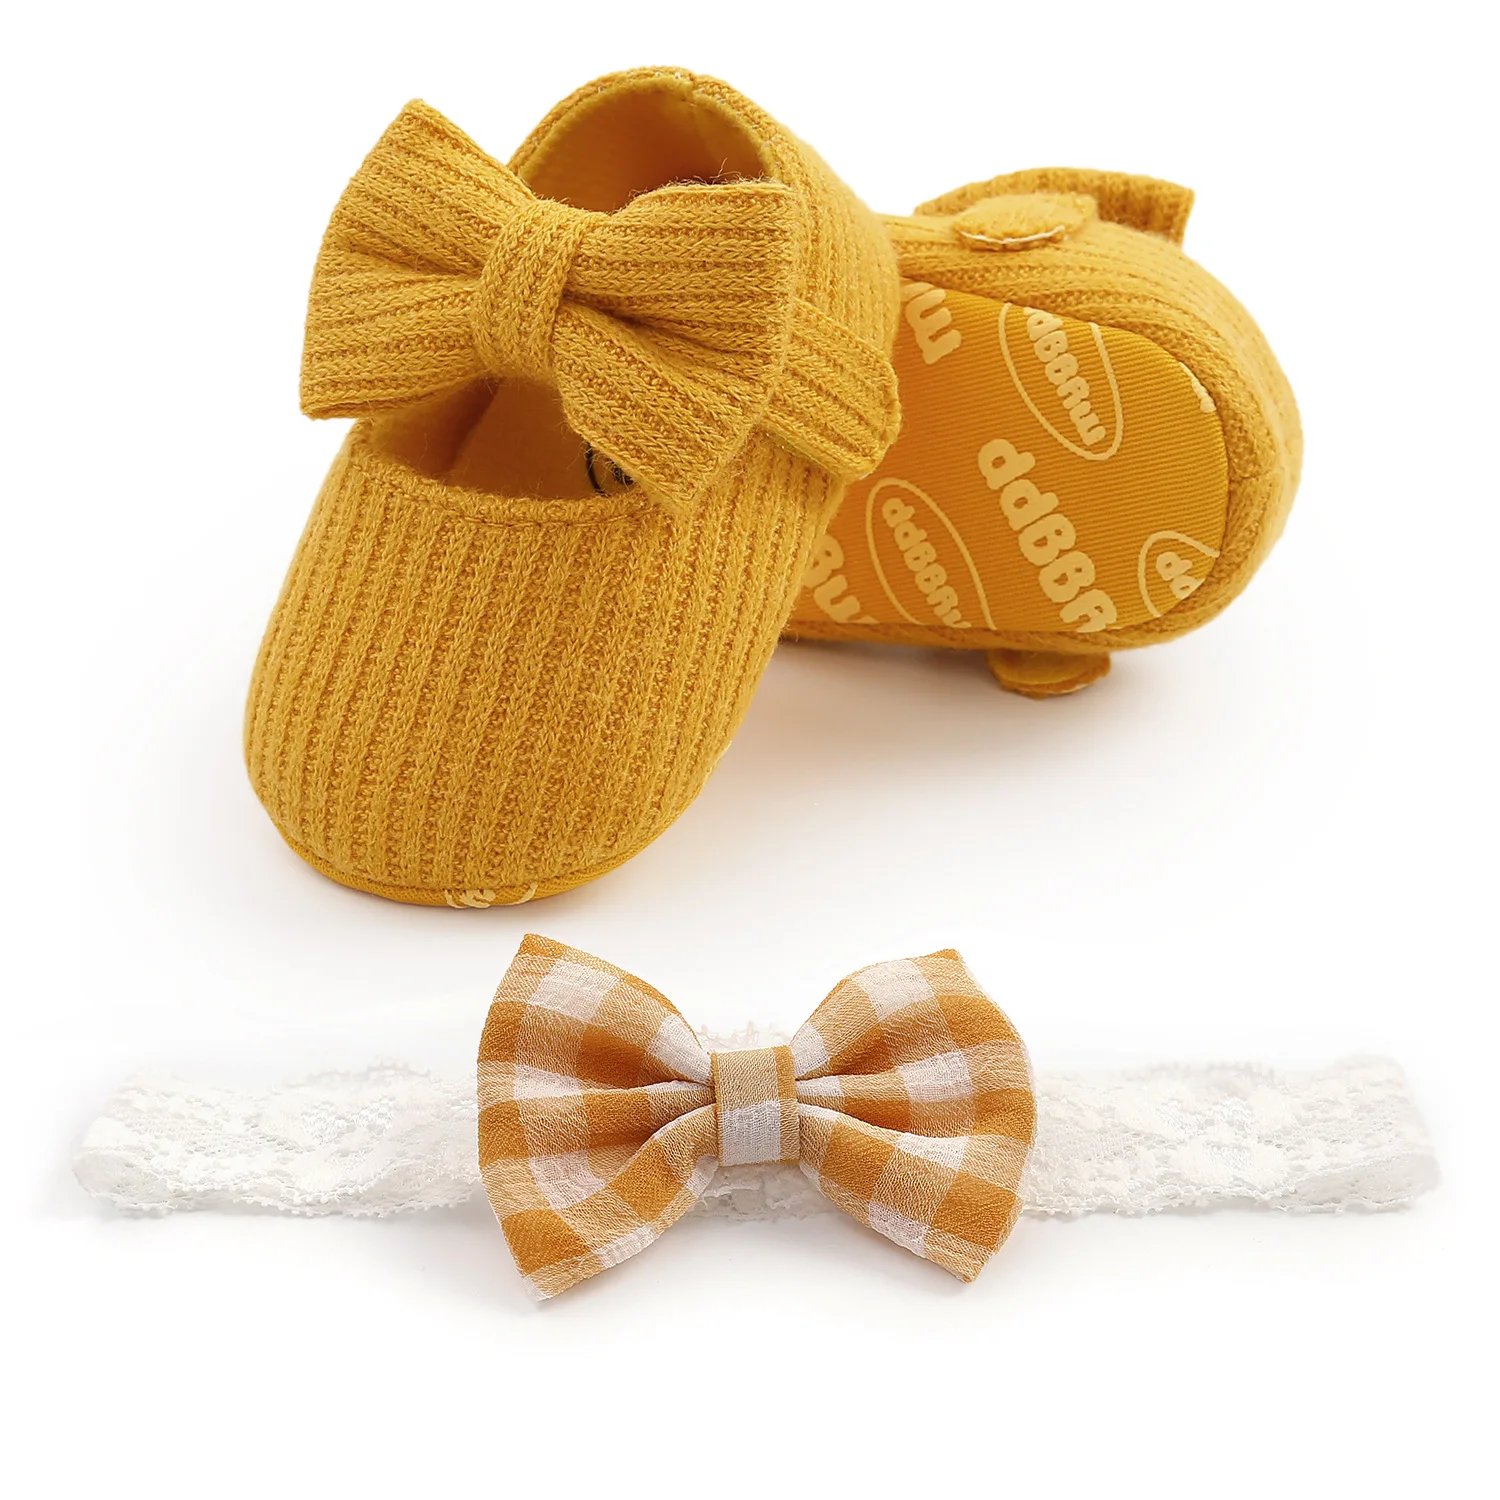 Fashion Gril Baby Shoes Lace Bowknot Little with Plaid headbands Girl Princess Infant Baby Dress Shoes